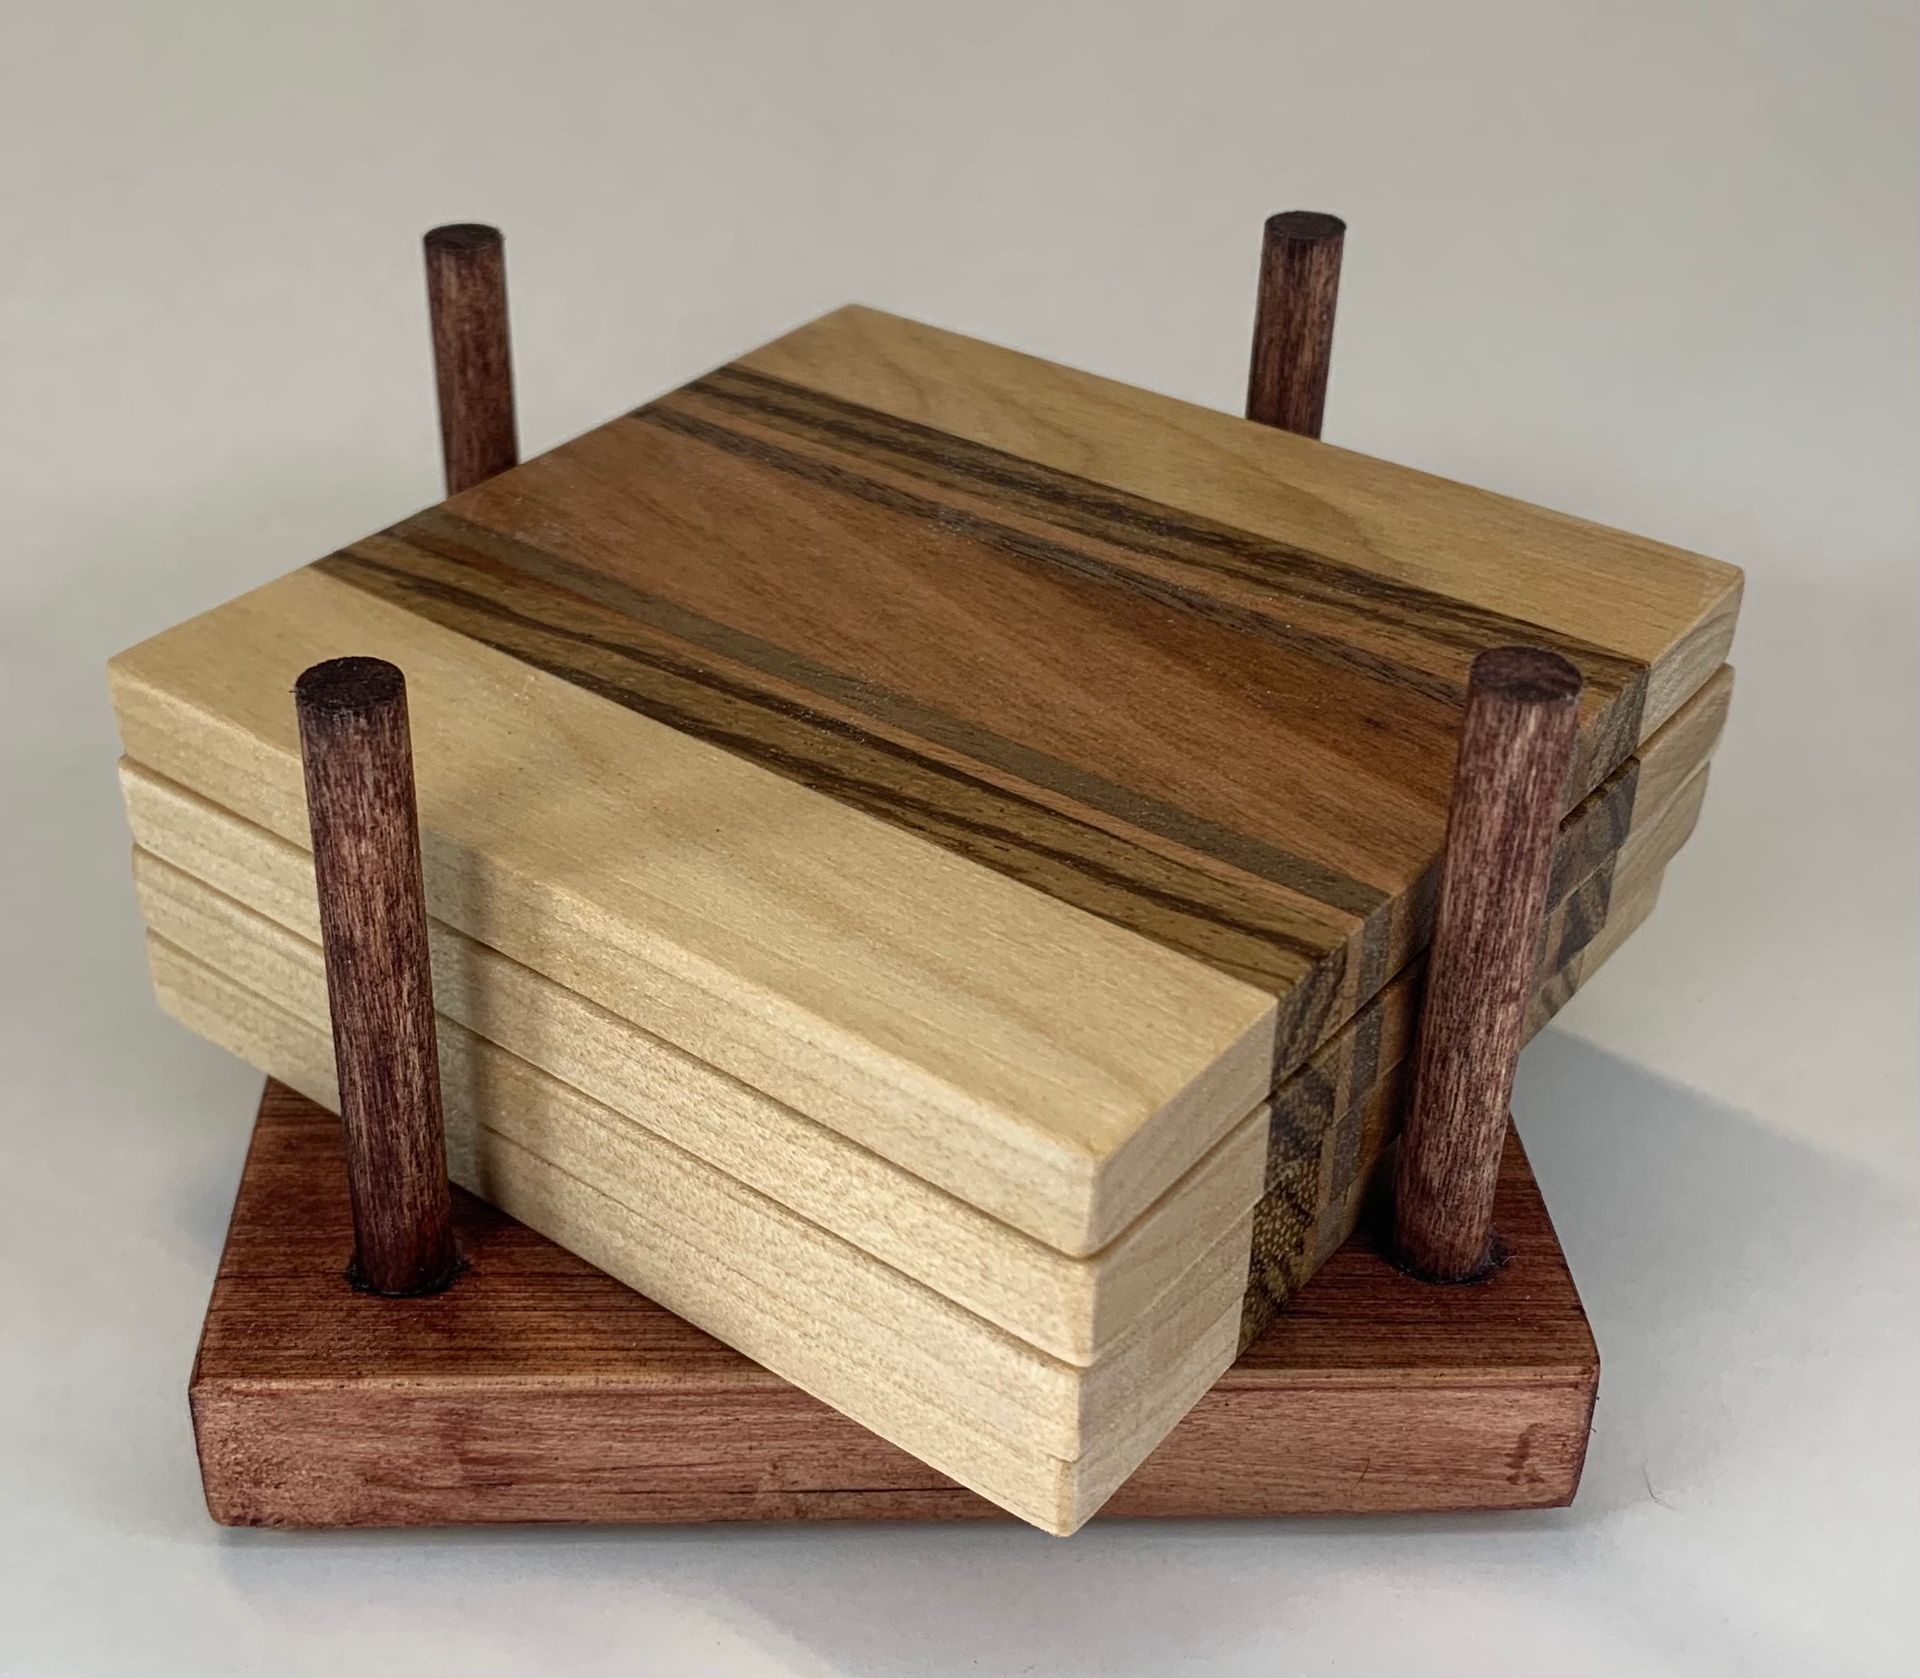 Four wooden coasters are stacked on top of each other on a wooden stand.